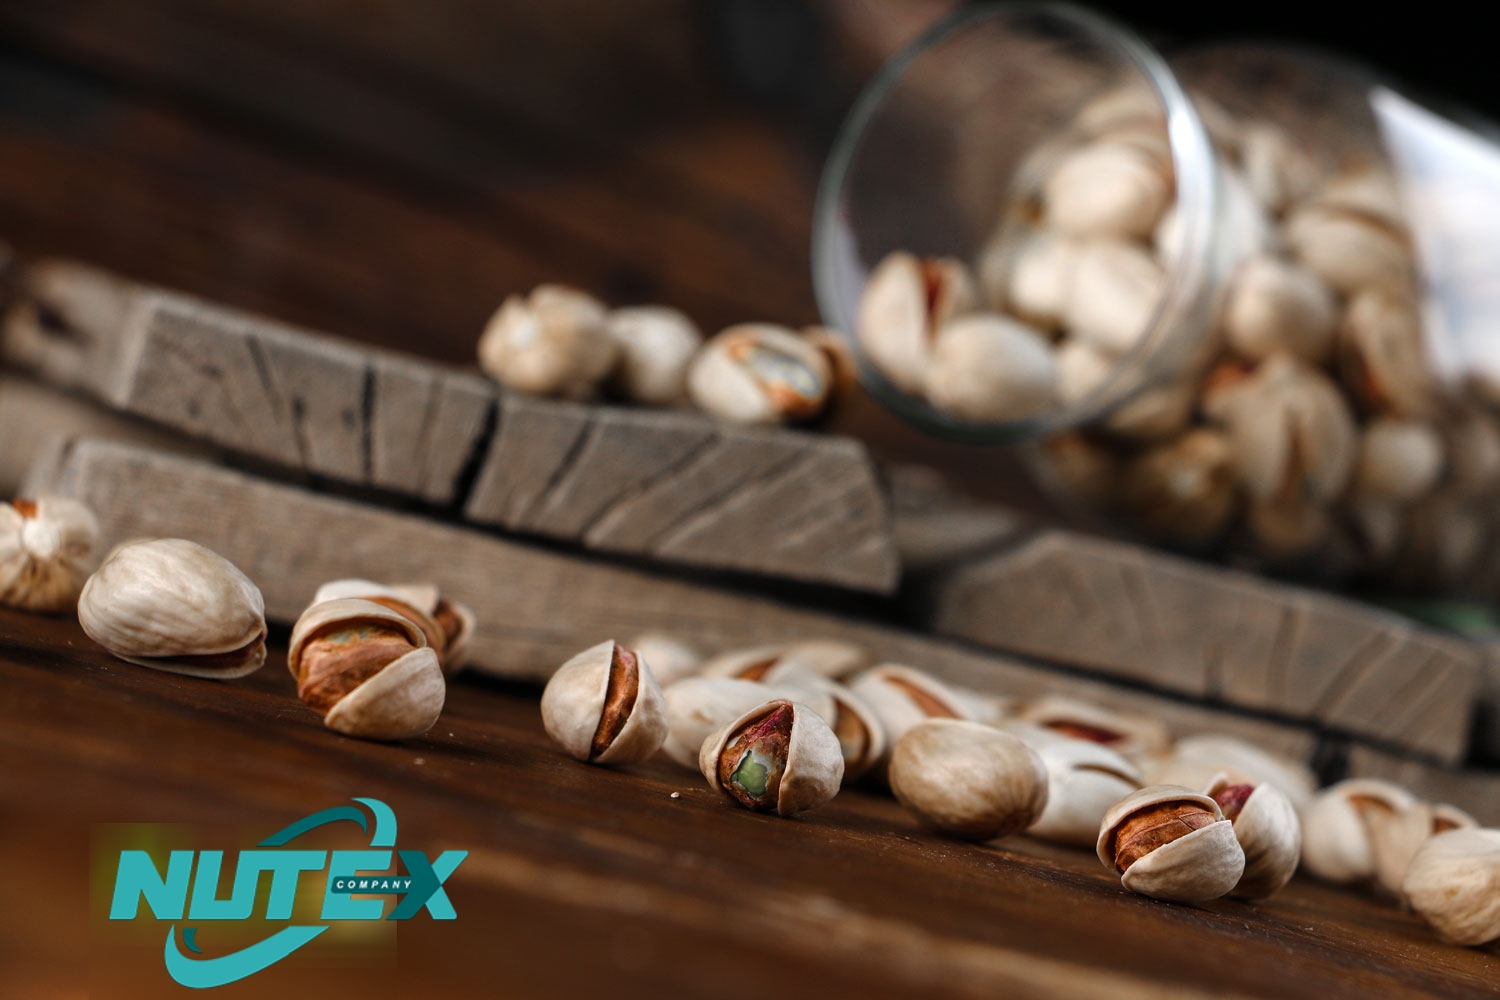  Pistachio and Date Export Company to India | Nutex 